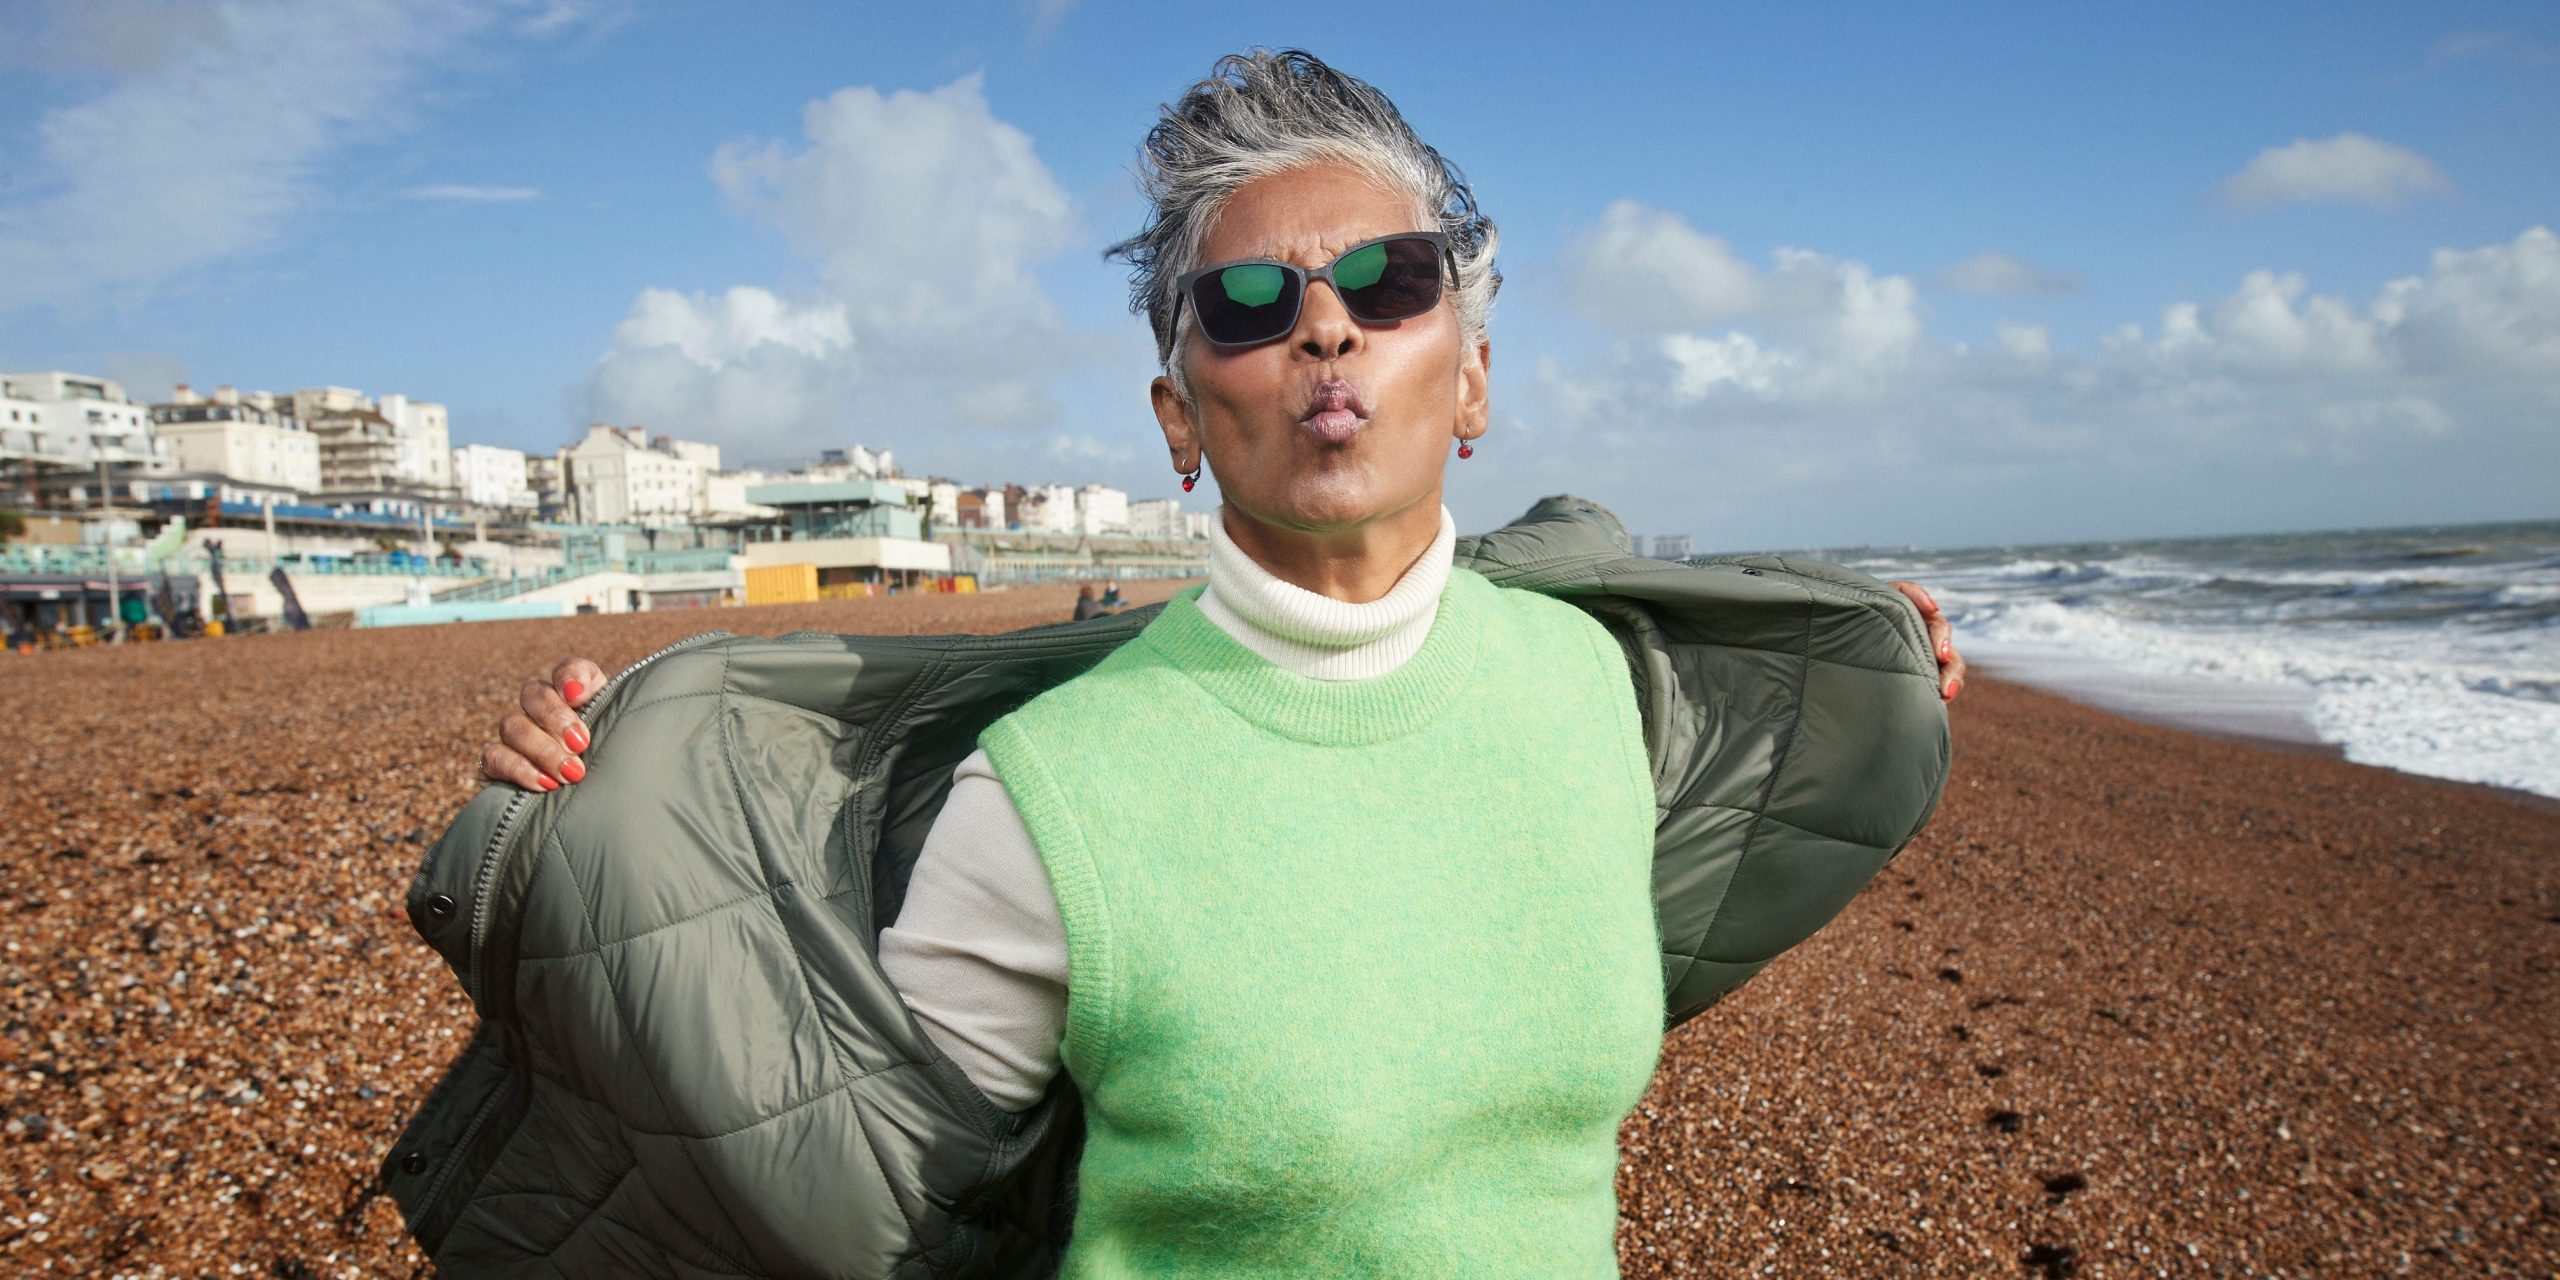 A senior woman puckers her lips while removing her jacket at a beach.